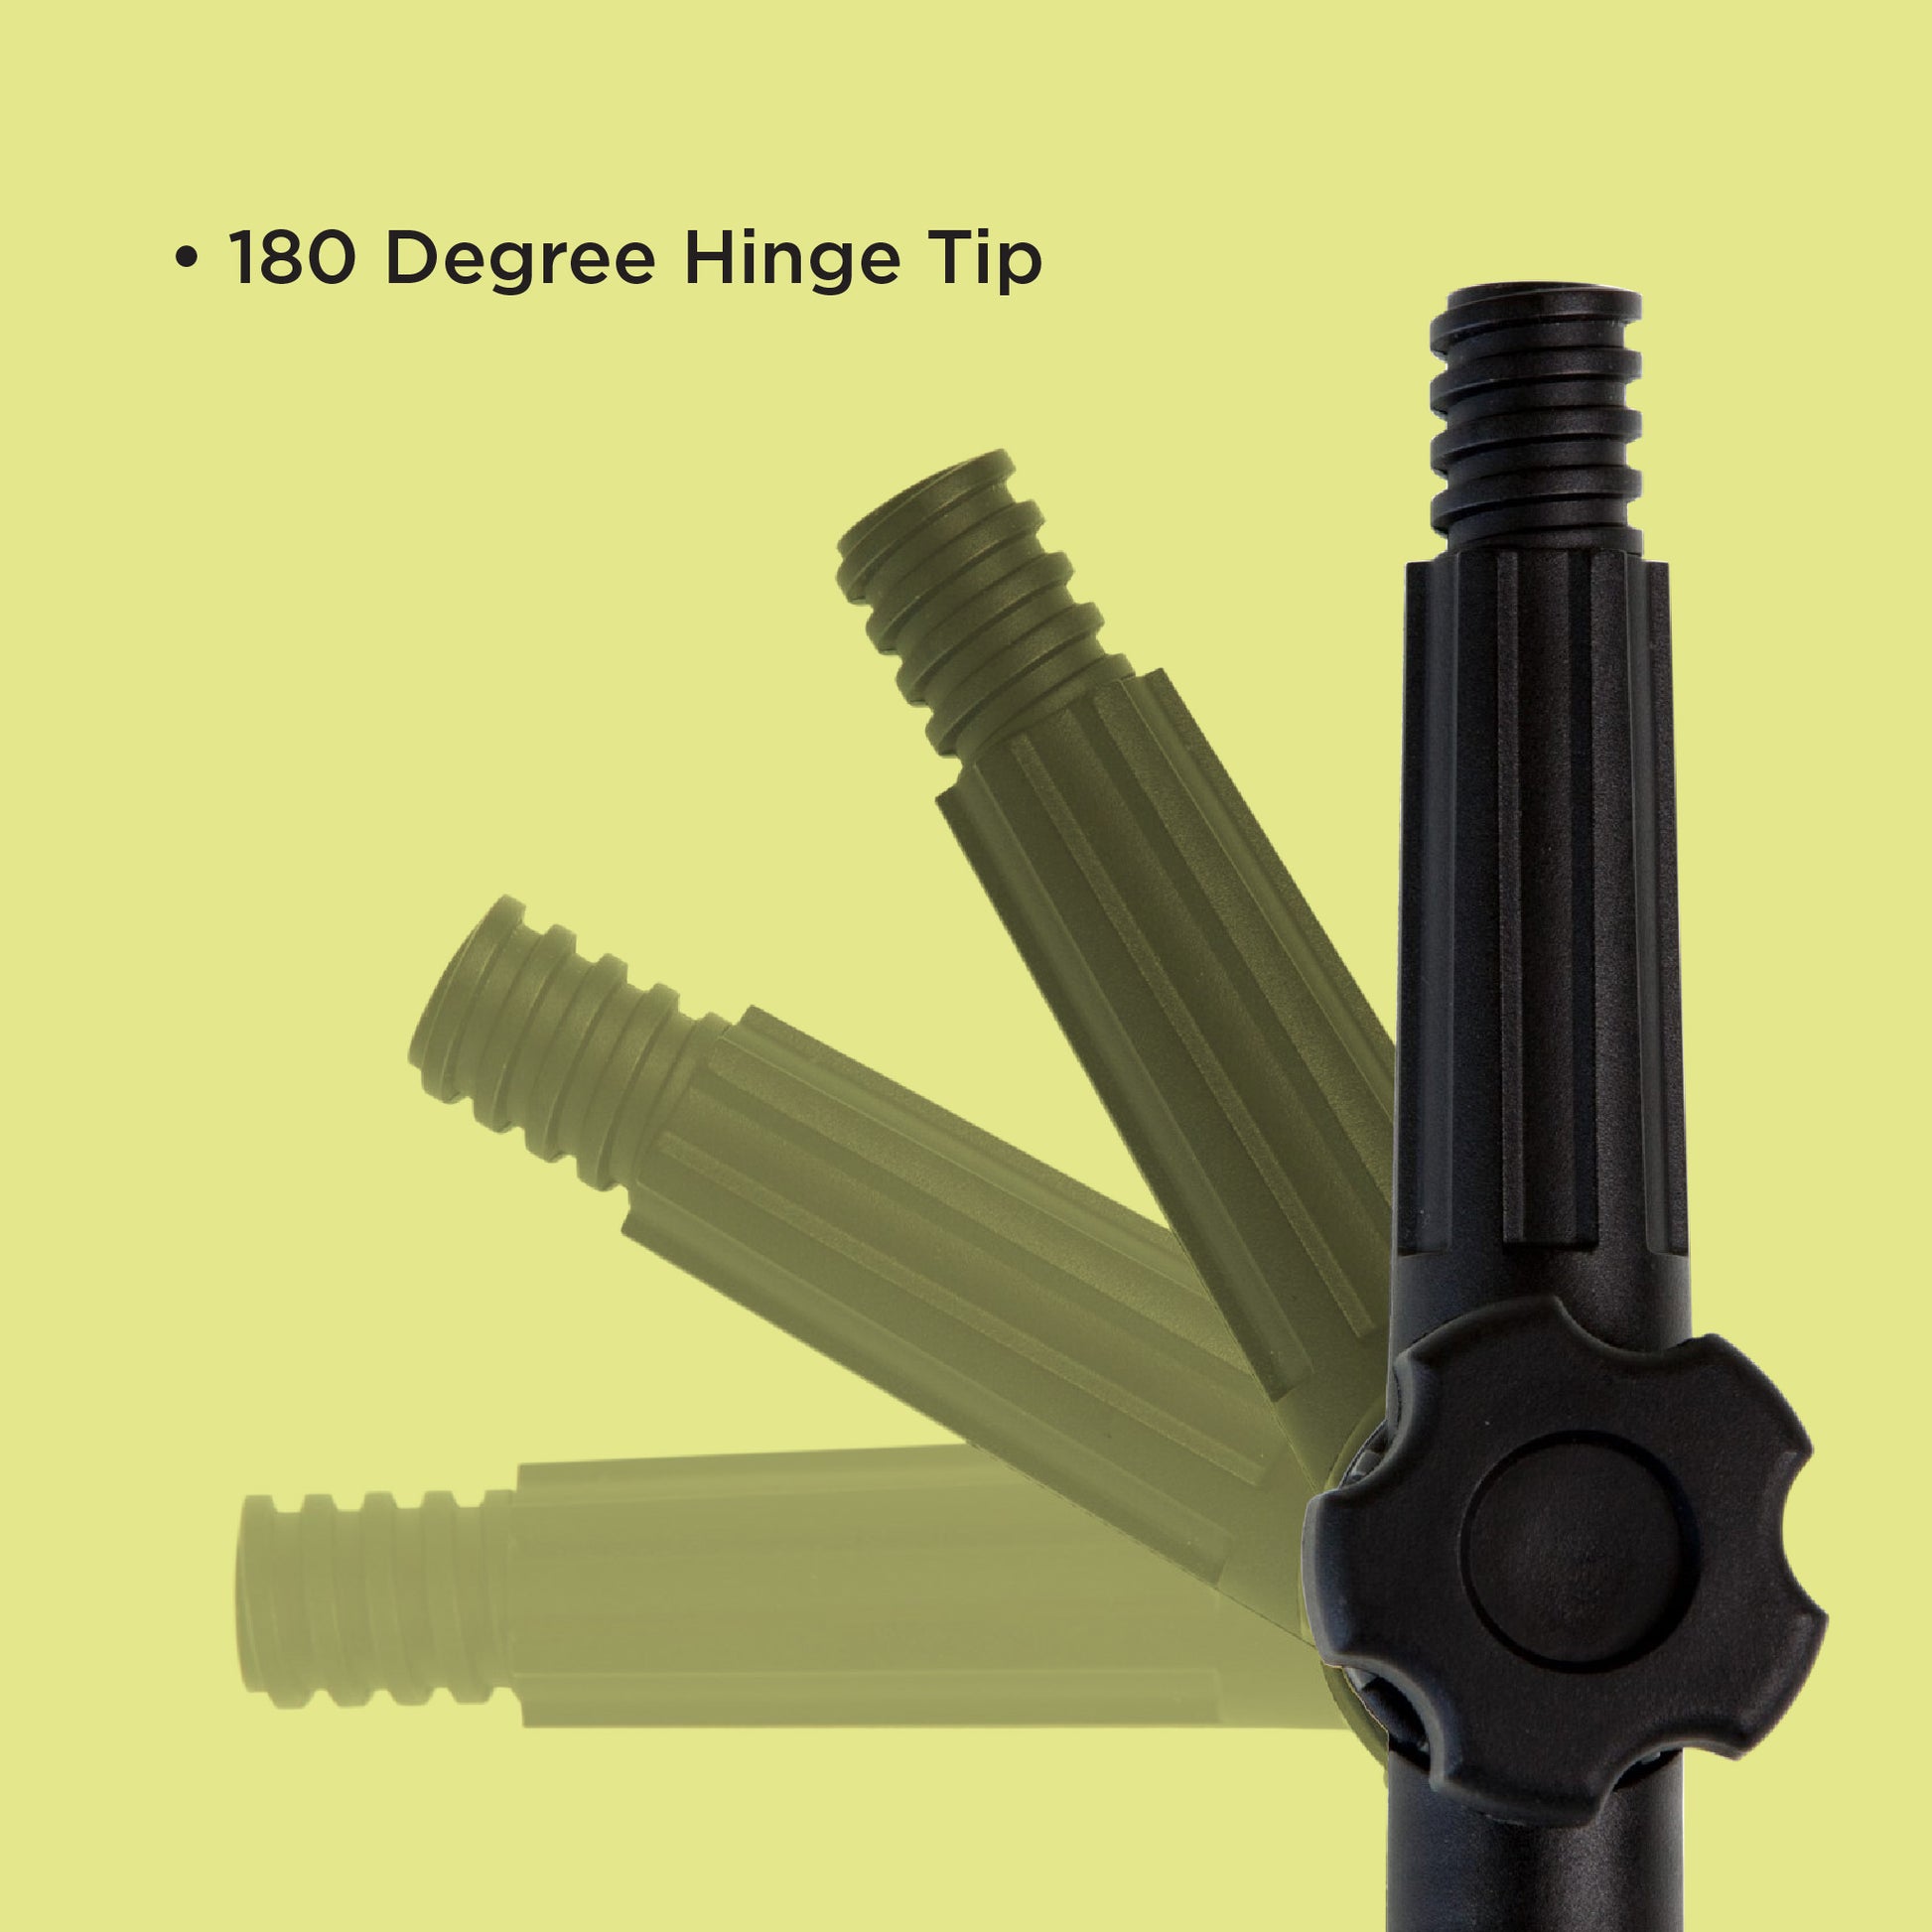 Multiple hinge tip at different angles.